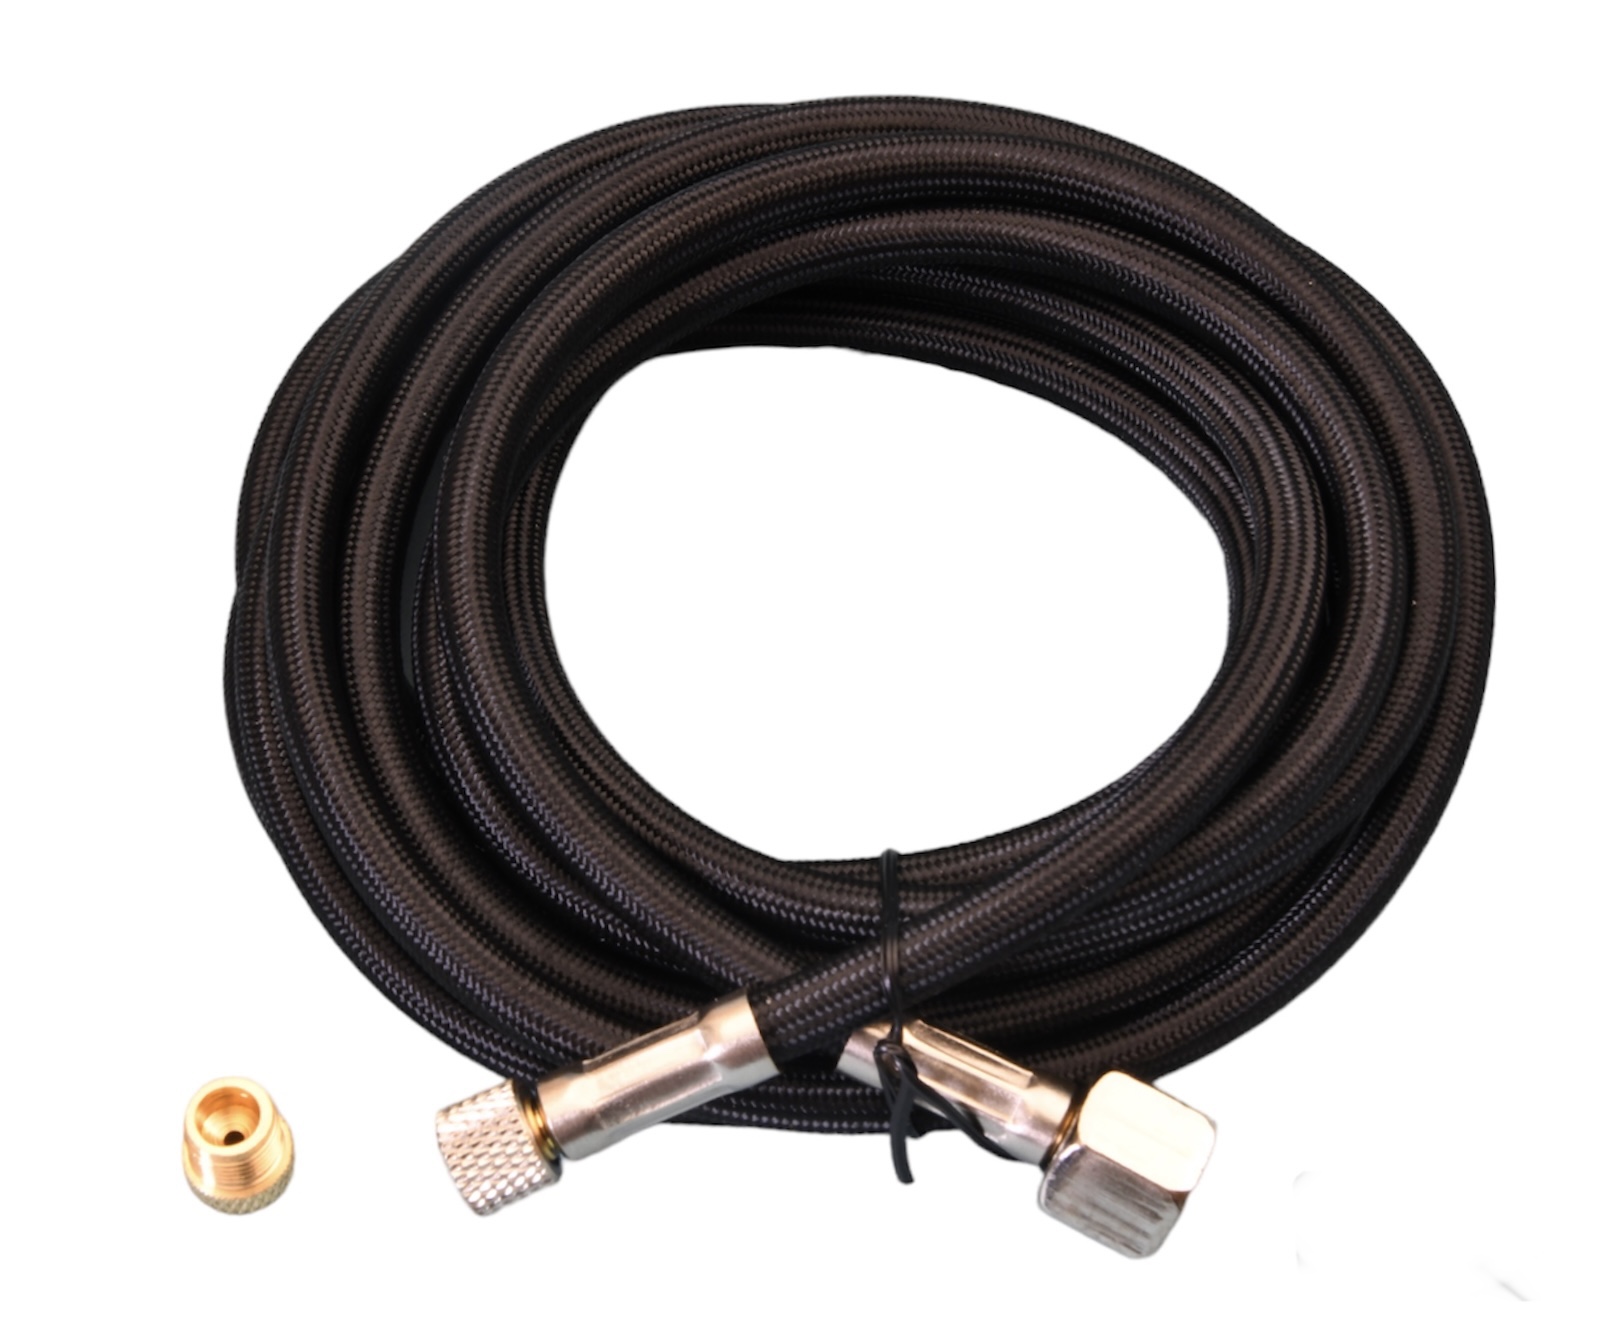 AB105 High Quality Airbrush Hose with 1/4 BSP Compressor Fitting & Adapter to suit Badger Airbrushes